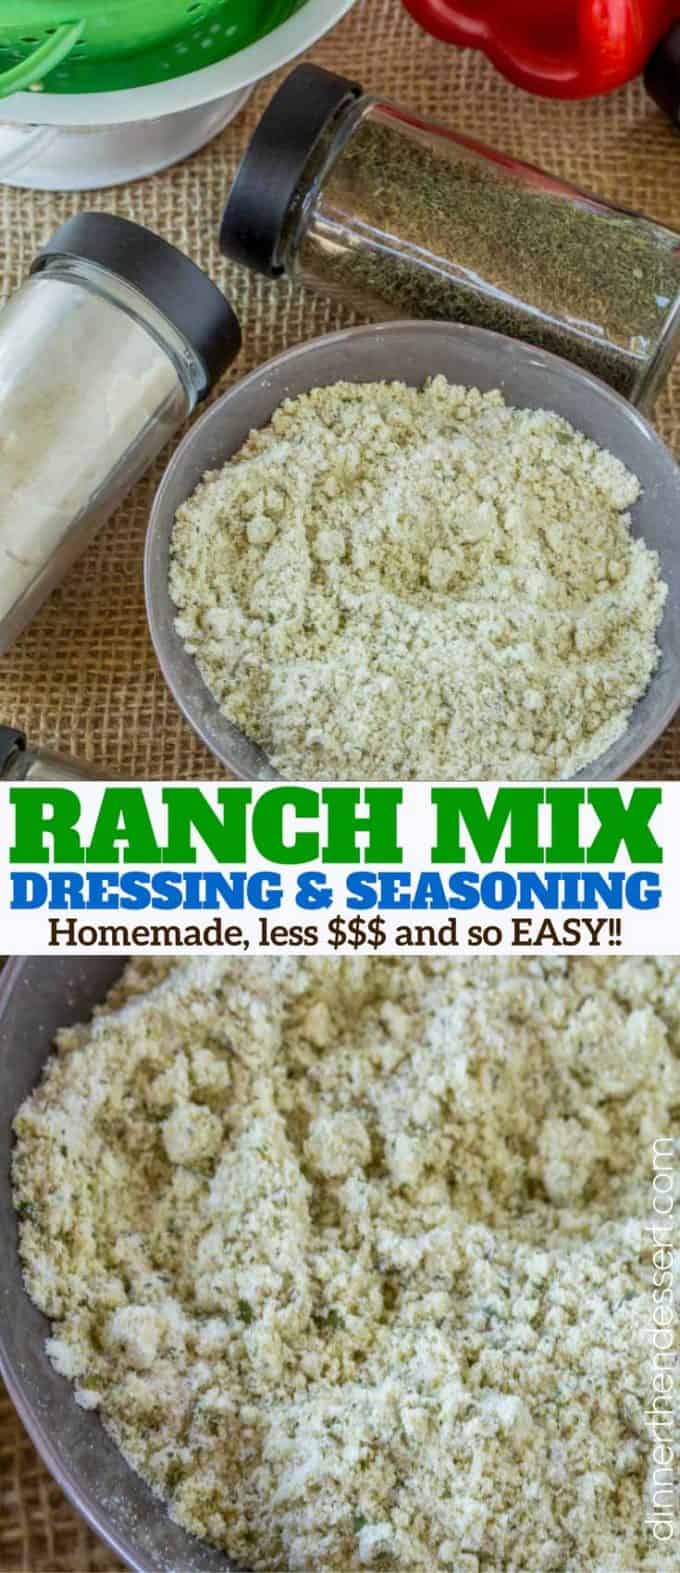 Homemade Ranch Dressing Mix without artificial ingredients and much less sodium! Easy to make and saves money over Hidden Valley Ranch seasoning packets!